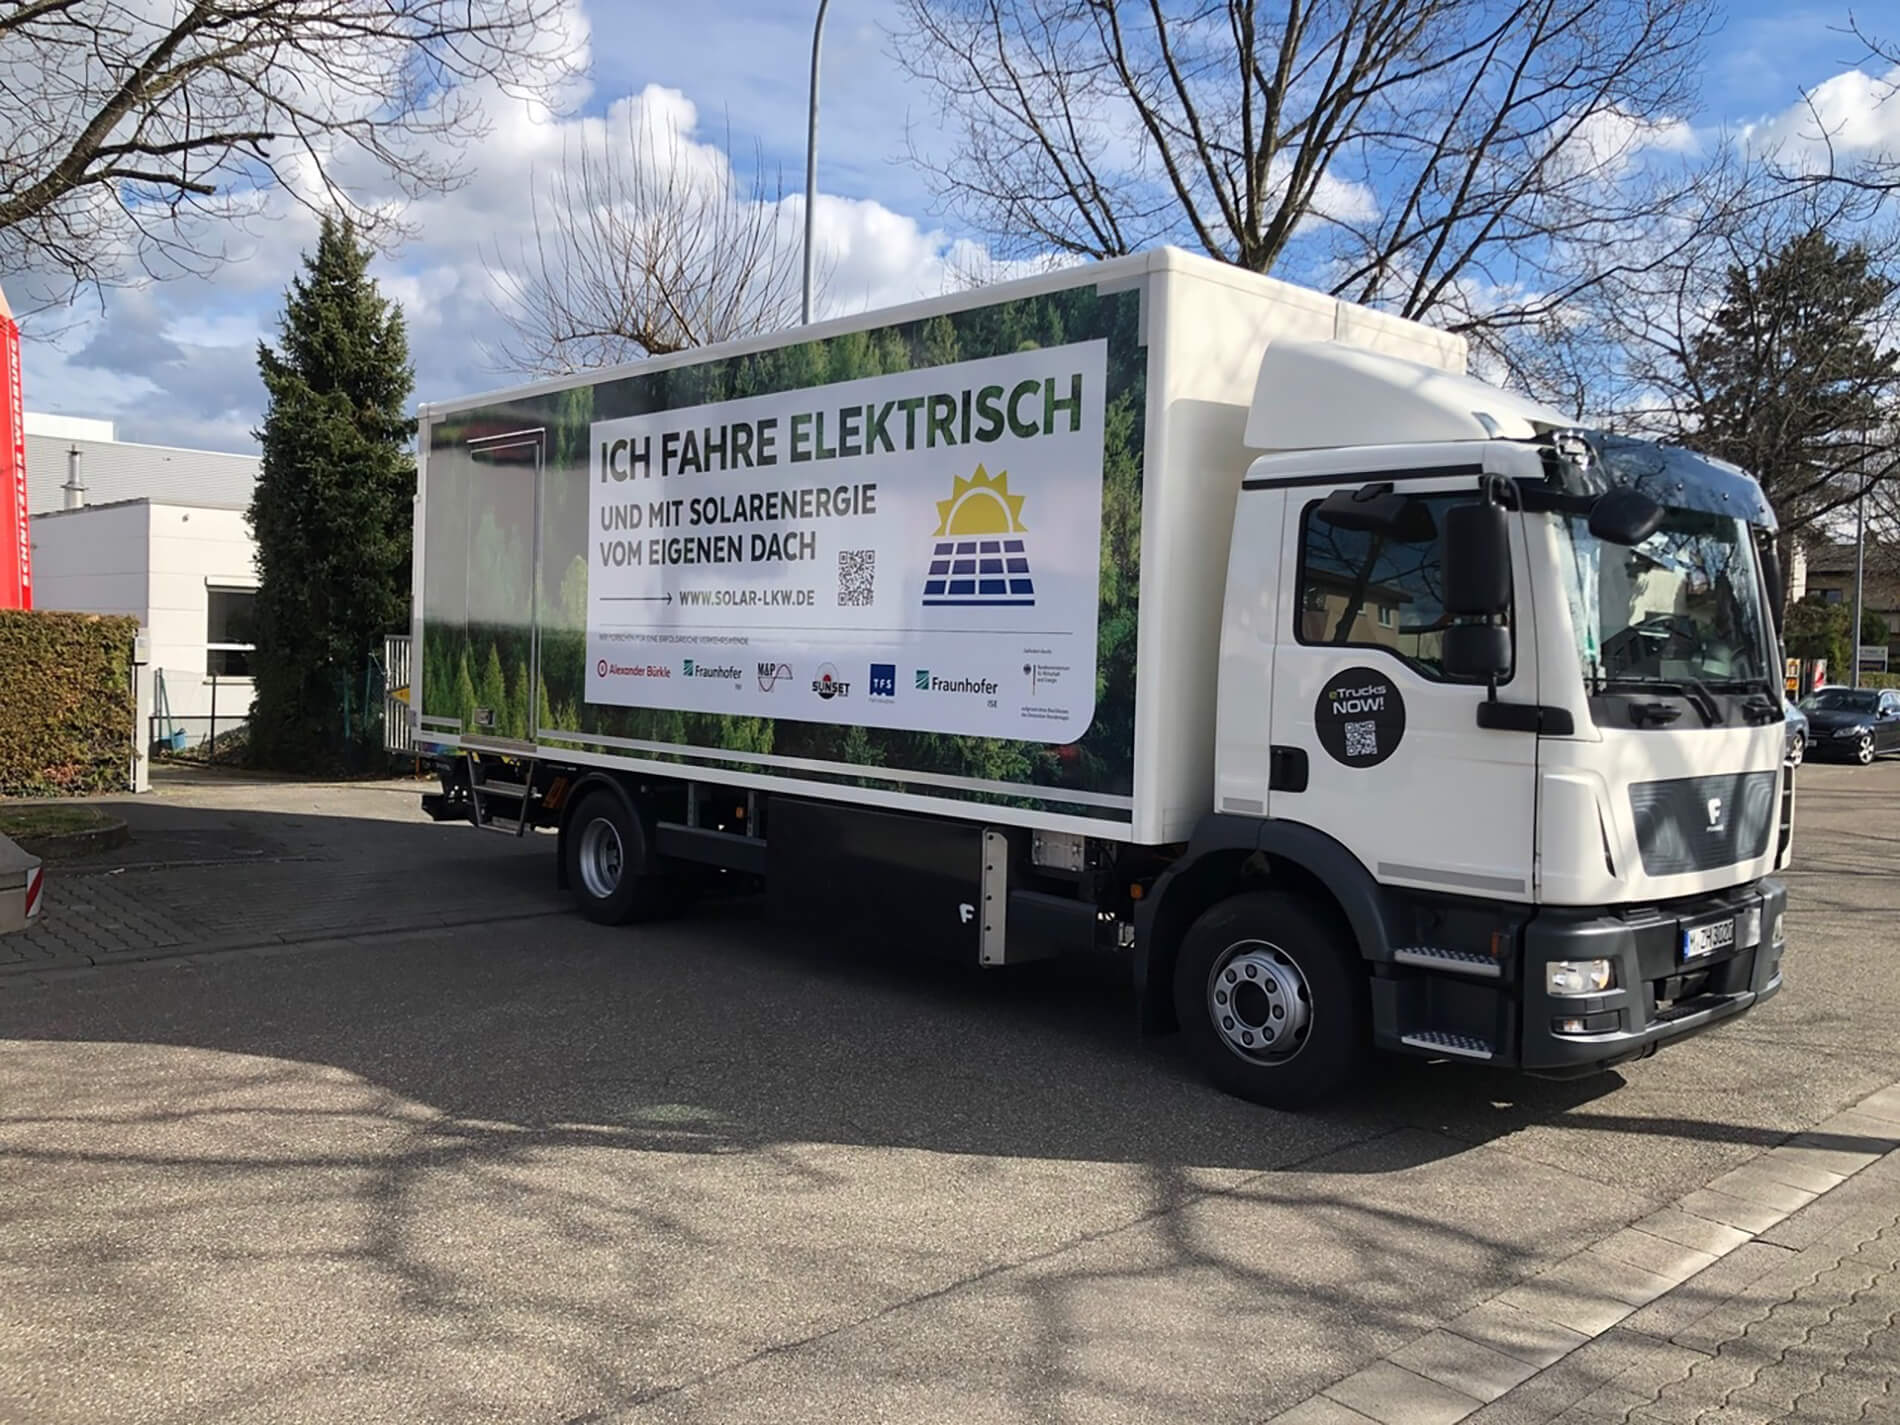 Electrical trucks and other commercial vehicles can save energy with solar energy